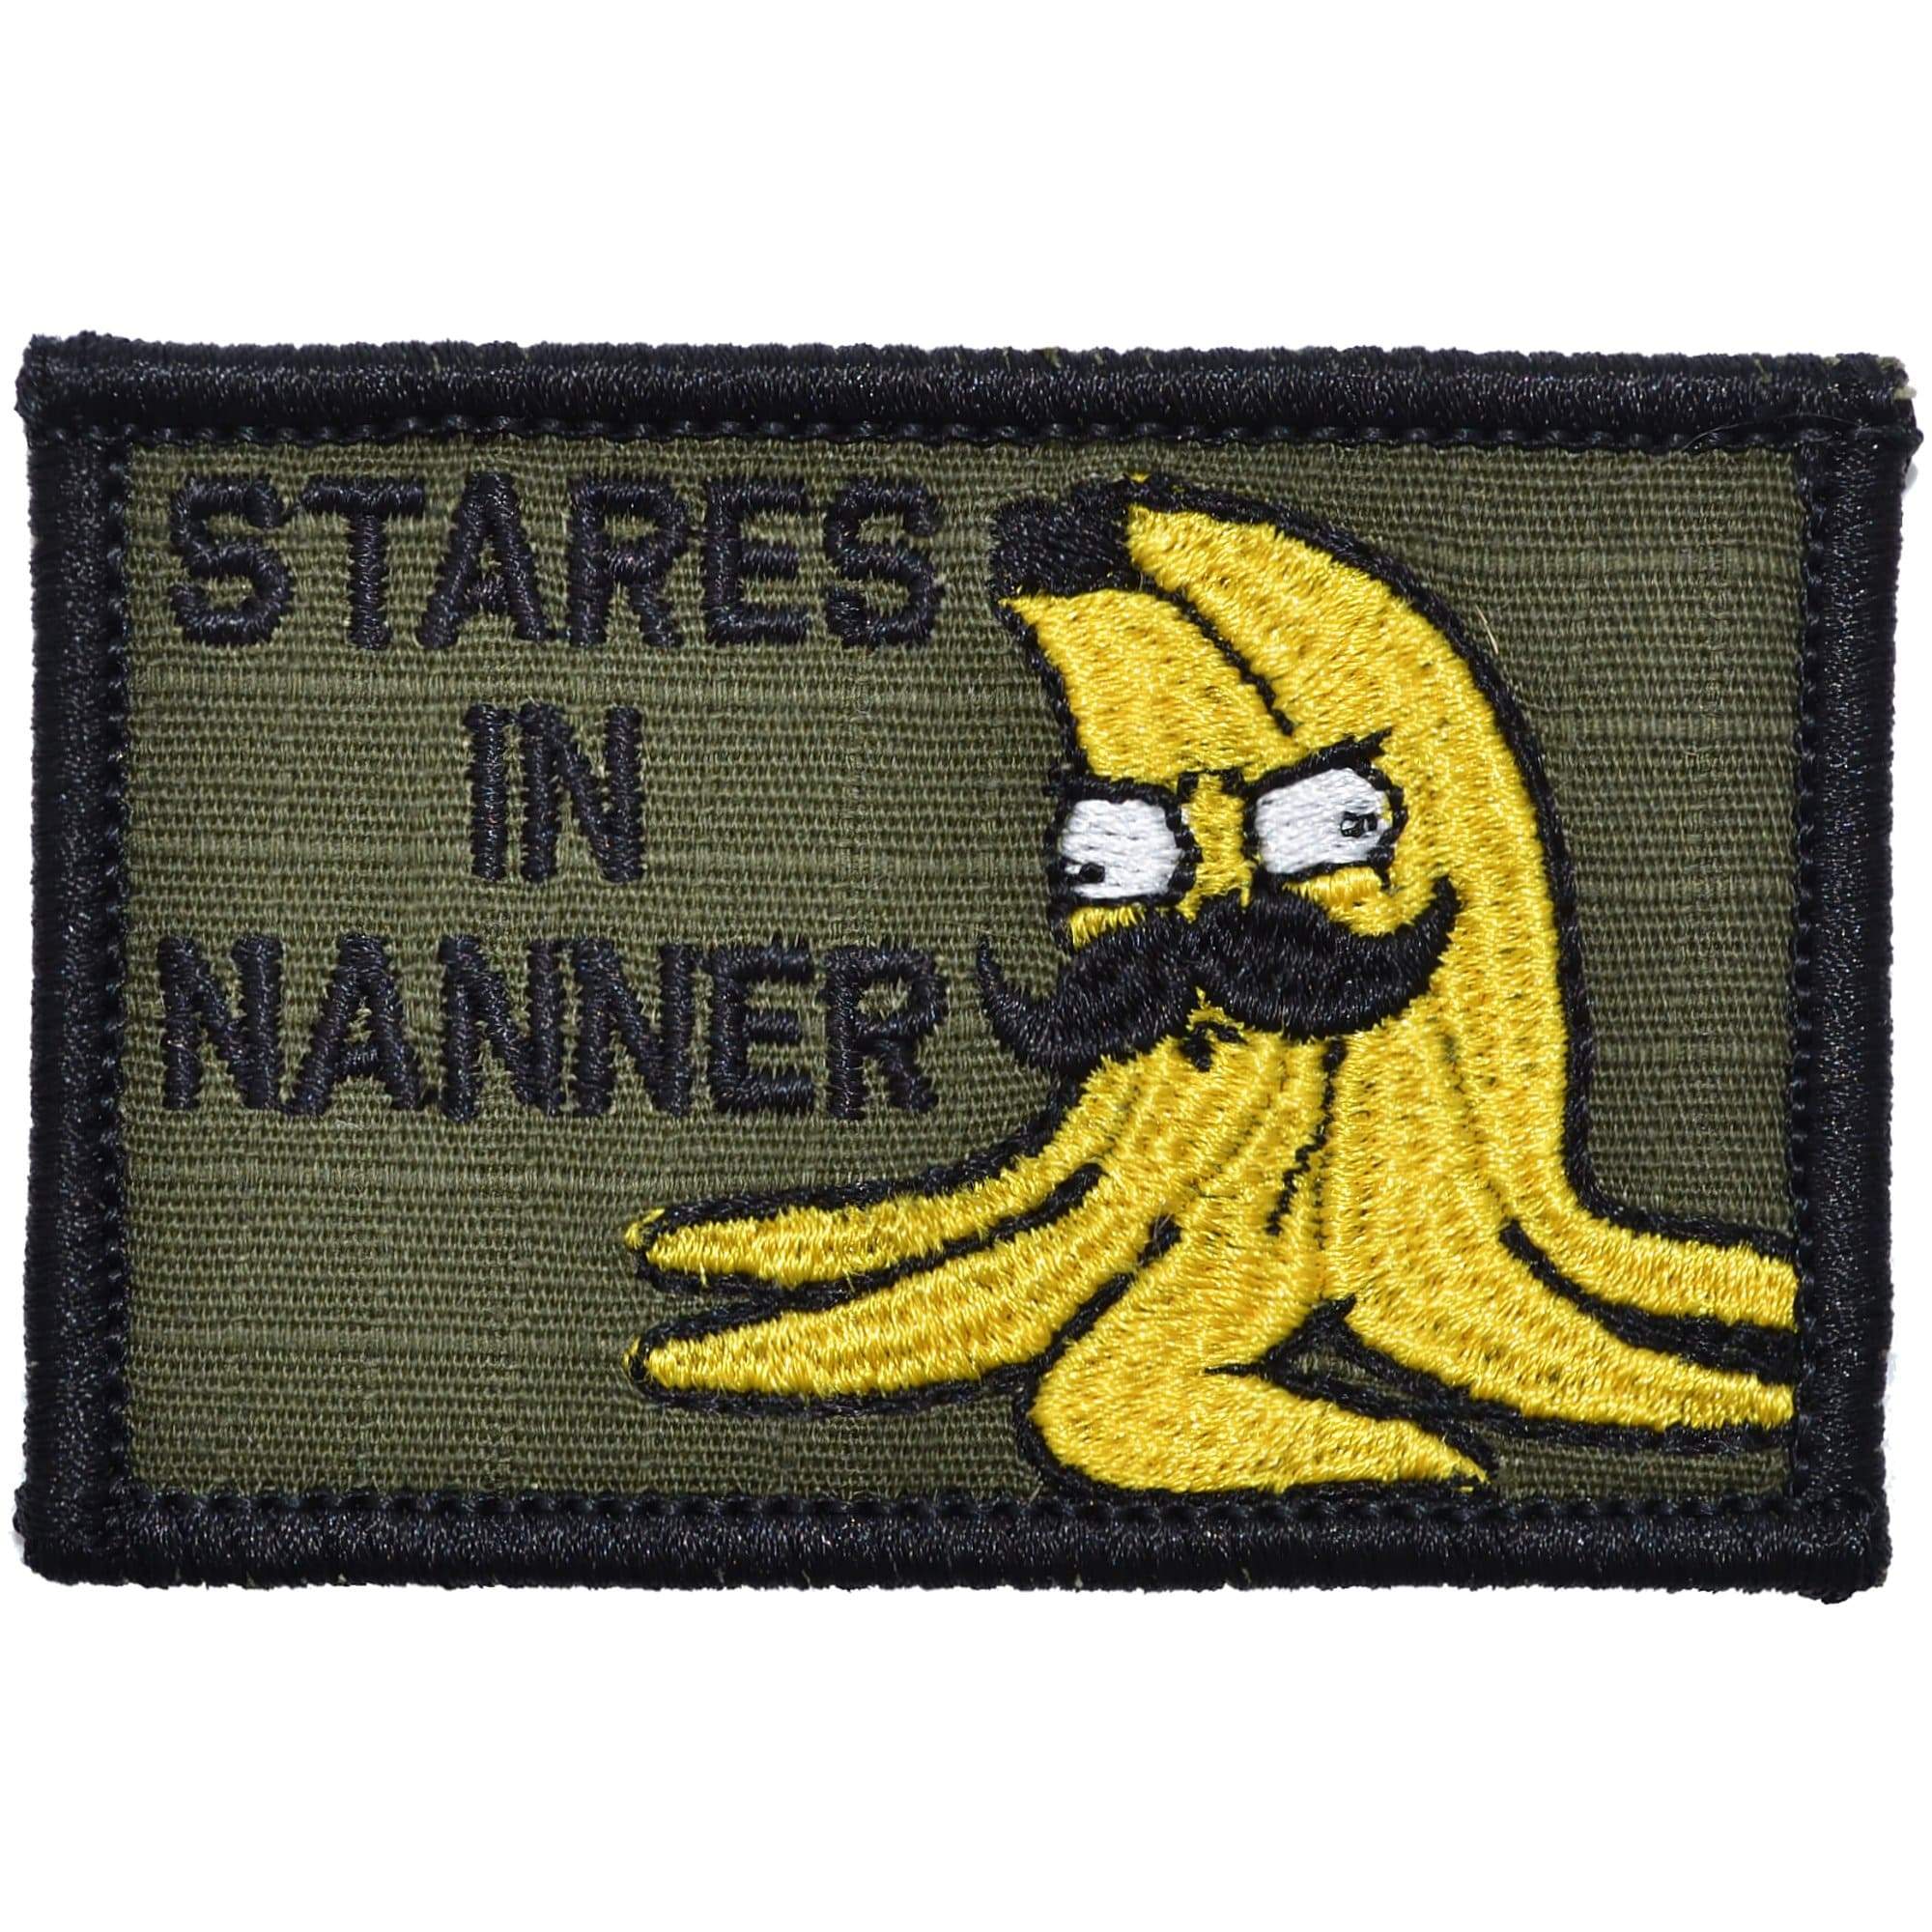 Tactical Gear Junkie Patches Olive Drab Sketch's World © Stares In Nanner - 2x3 Patch